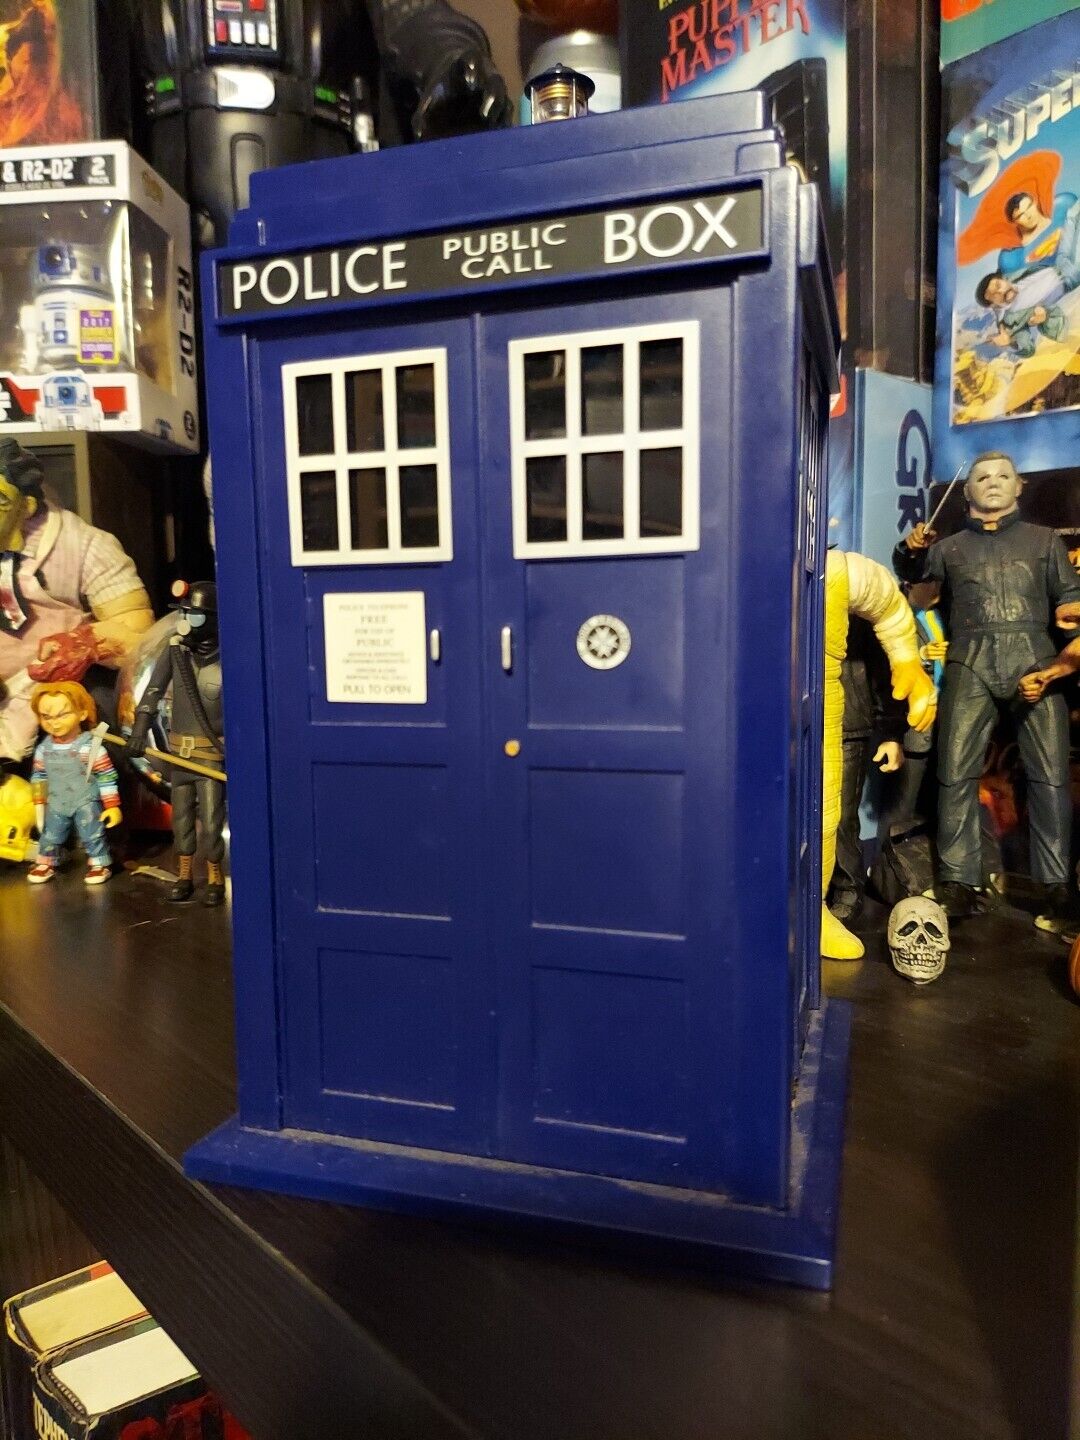 DR WHO Tardis desktop cookie container storage box w/ working sounds